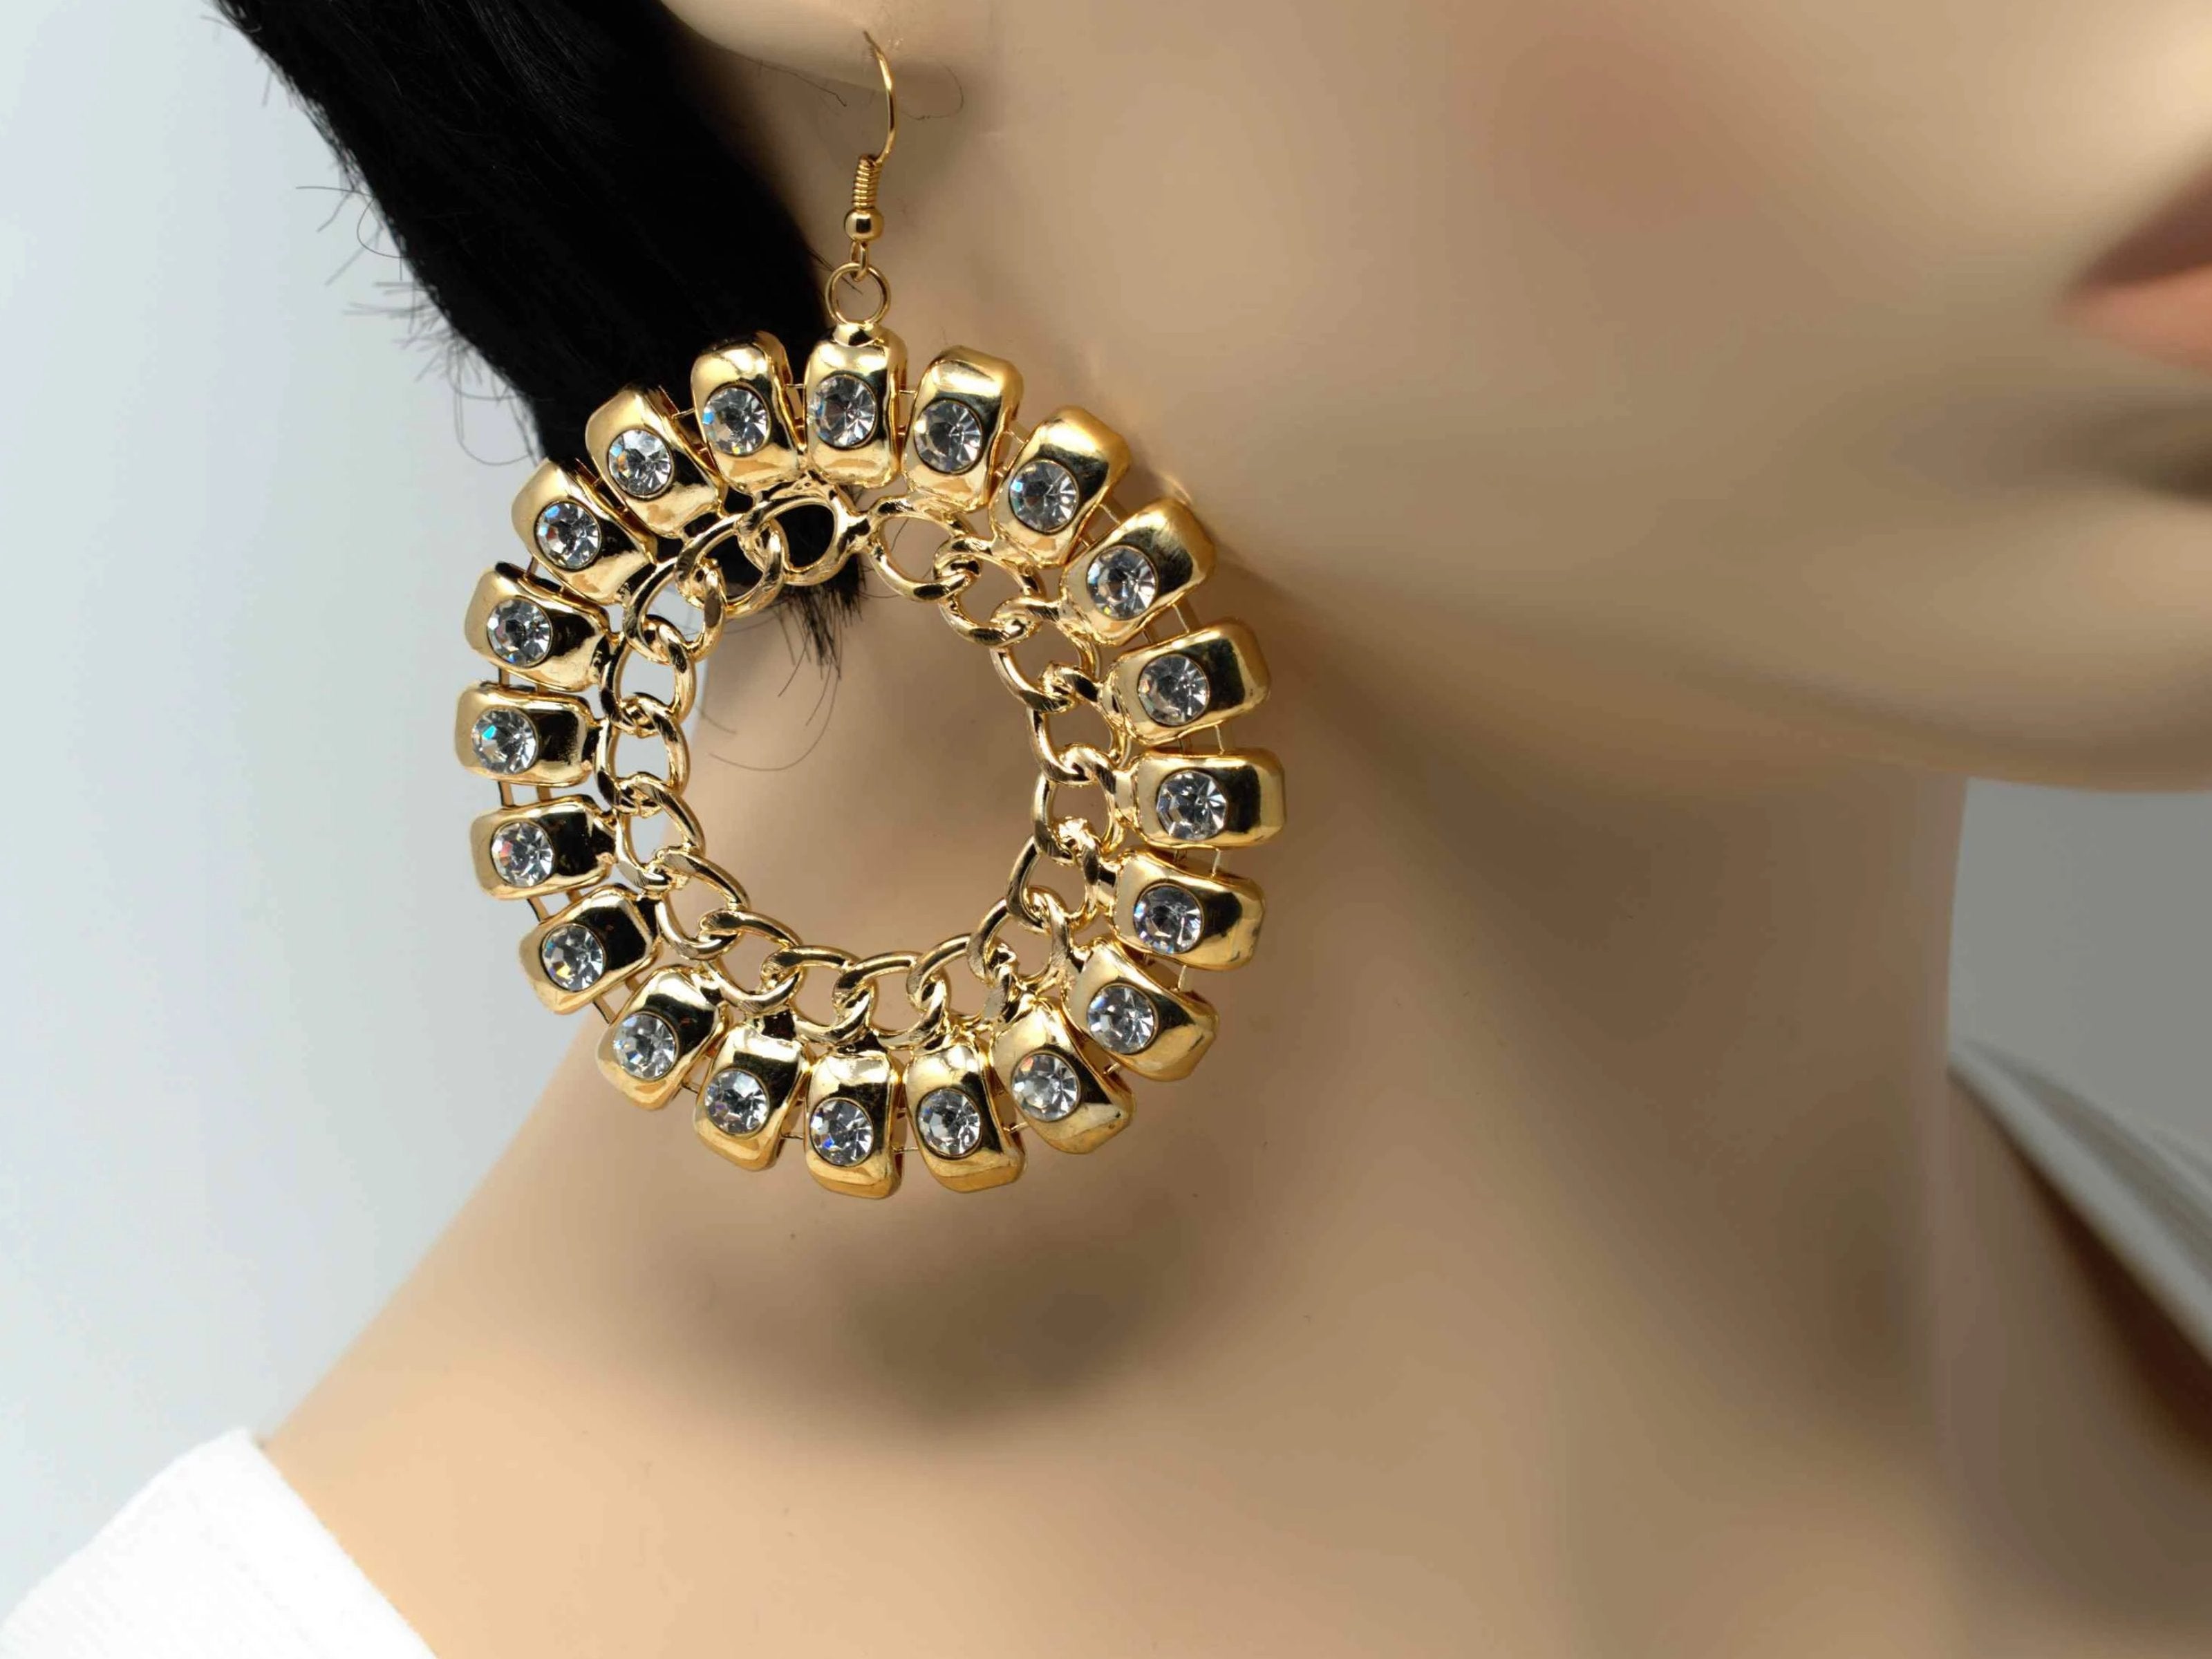 An exquisite gold dangle drop fashion earring with stones and chain accent and a fish hook clasp.